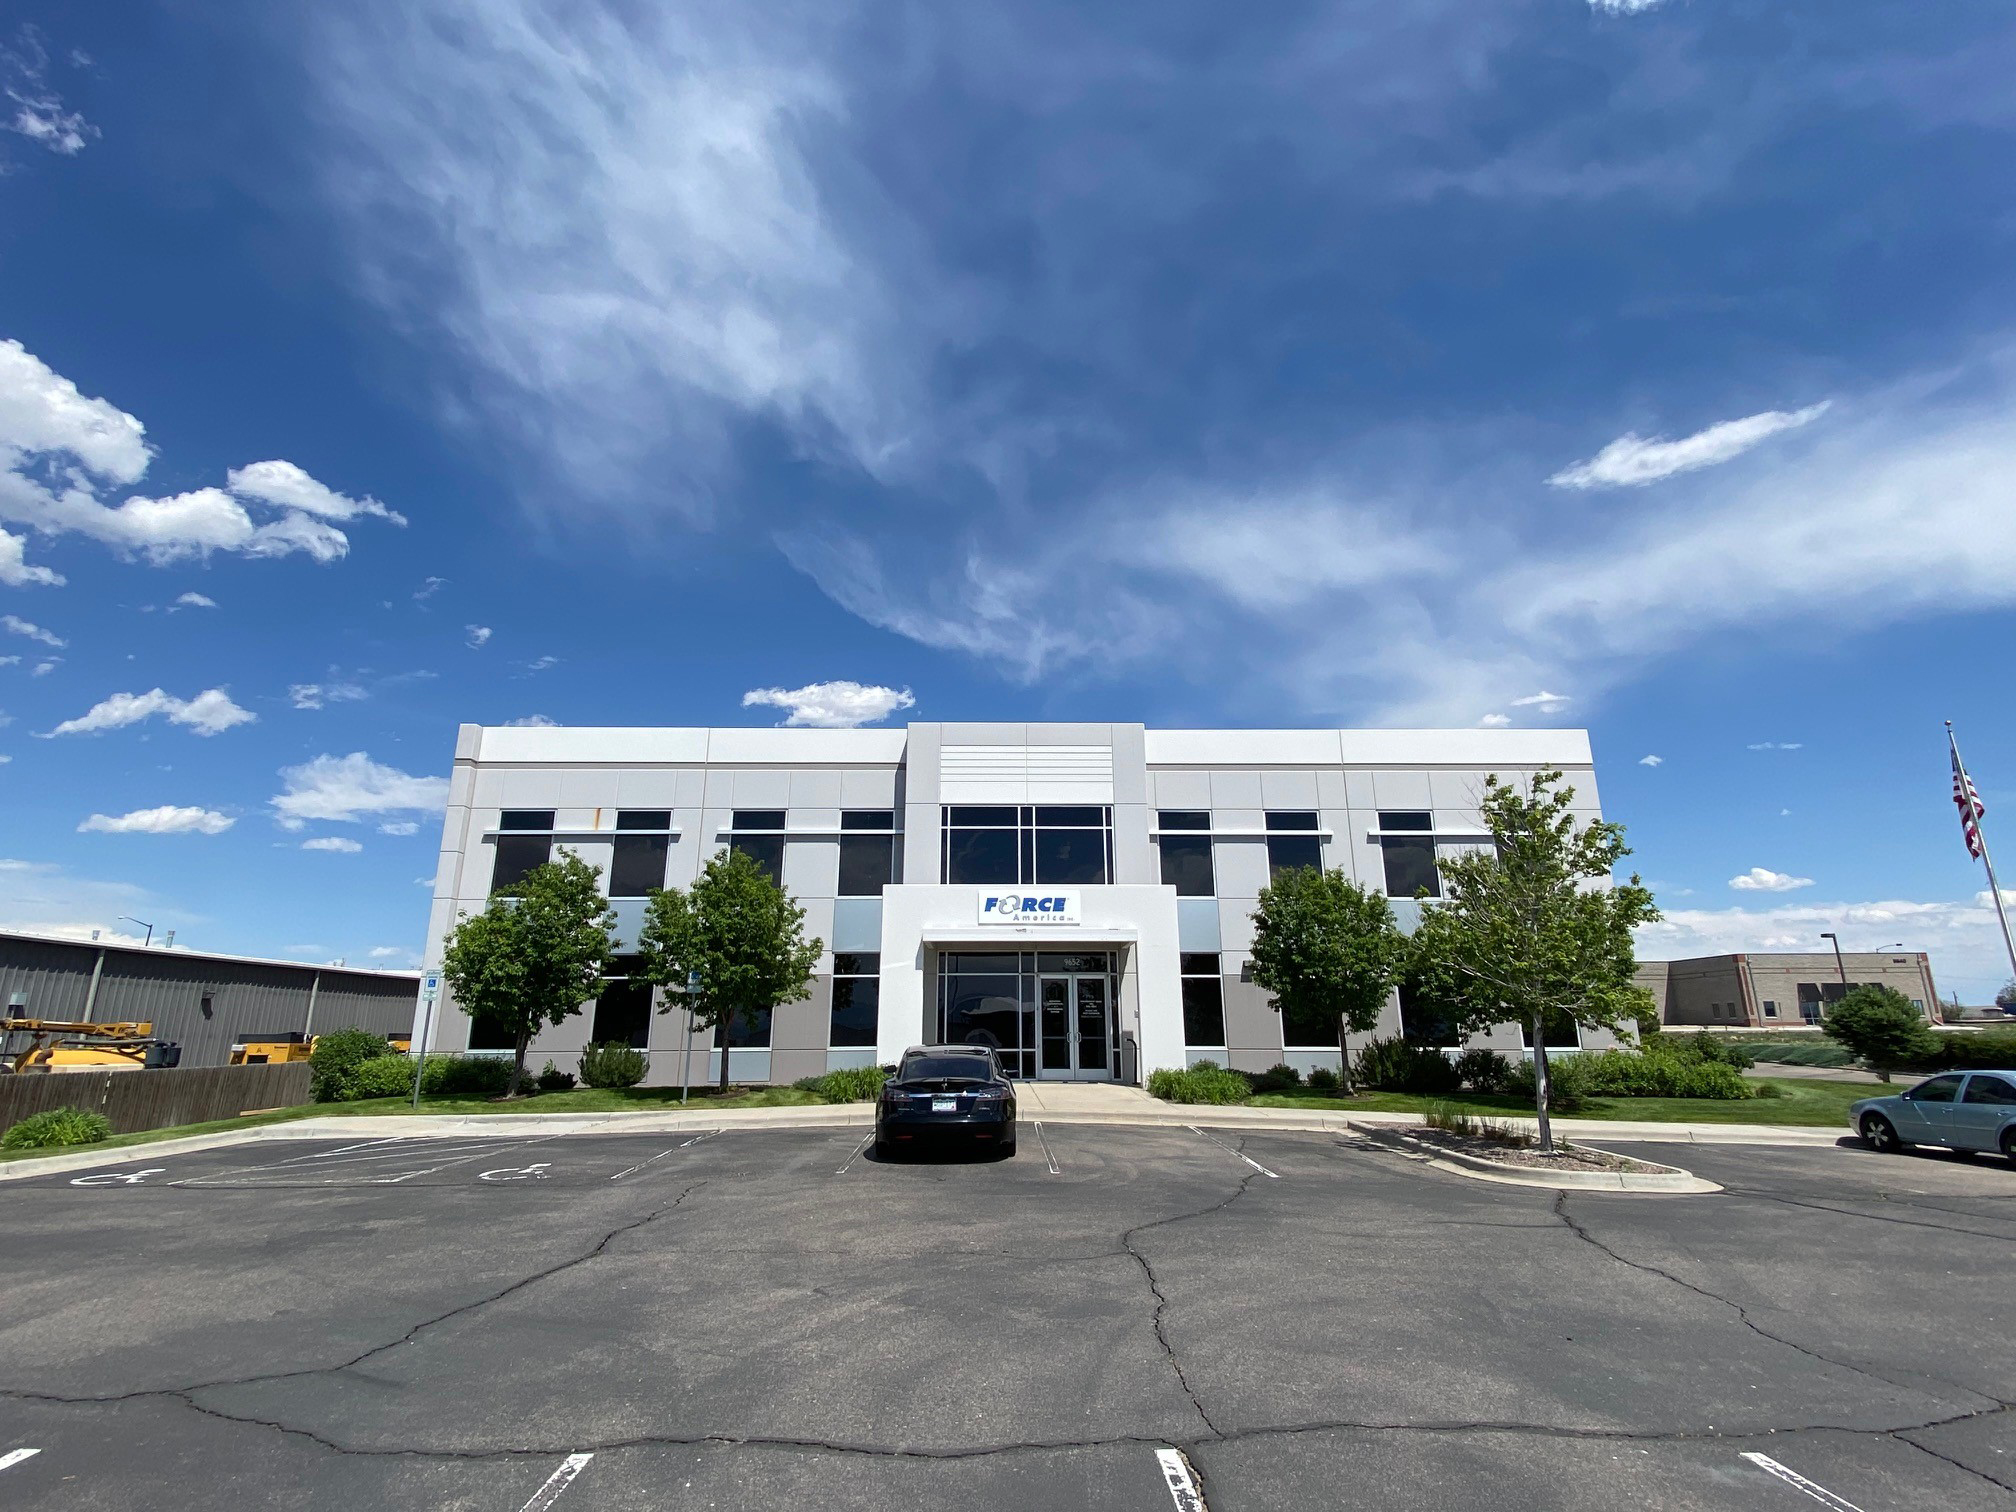 Industrial/Flex Property in Commerce City, CO Sells for $4,600,000